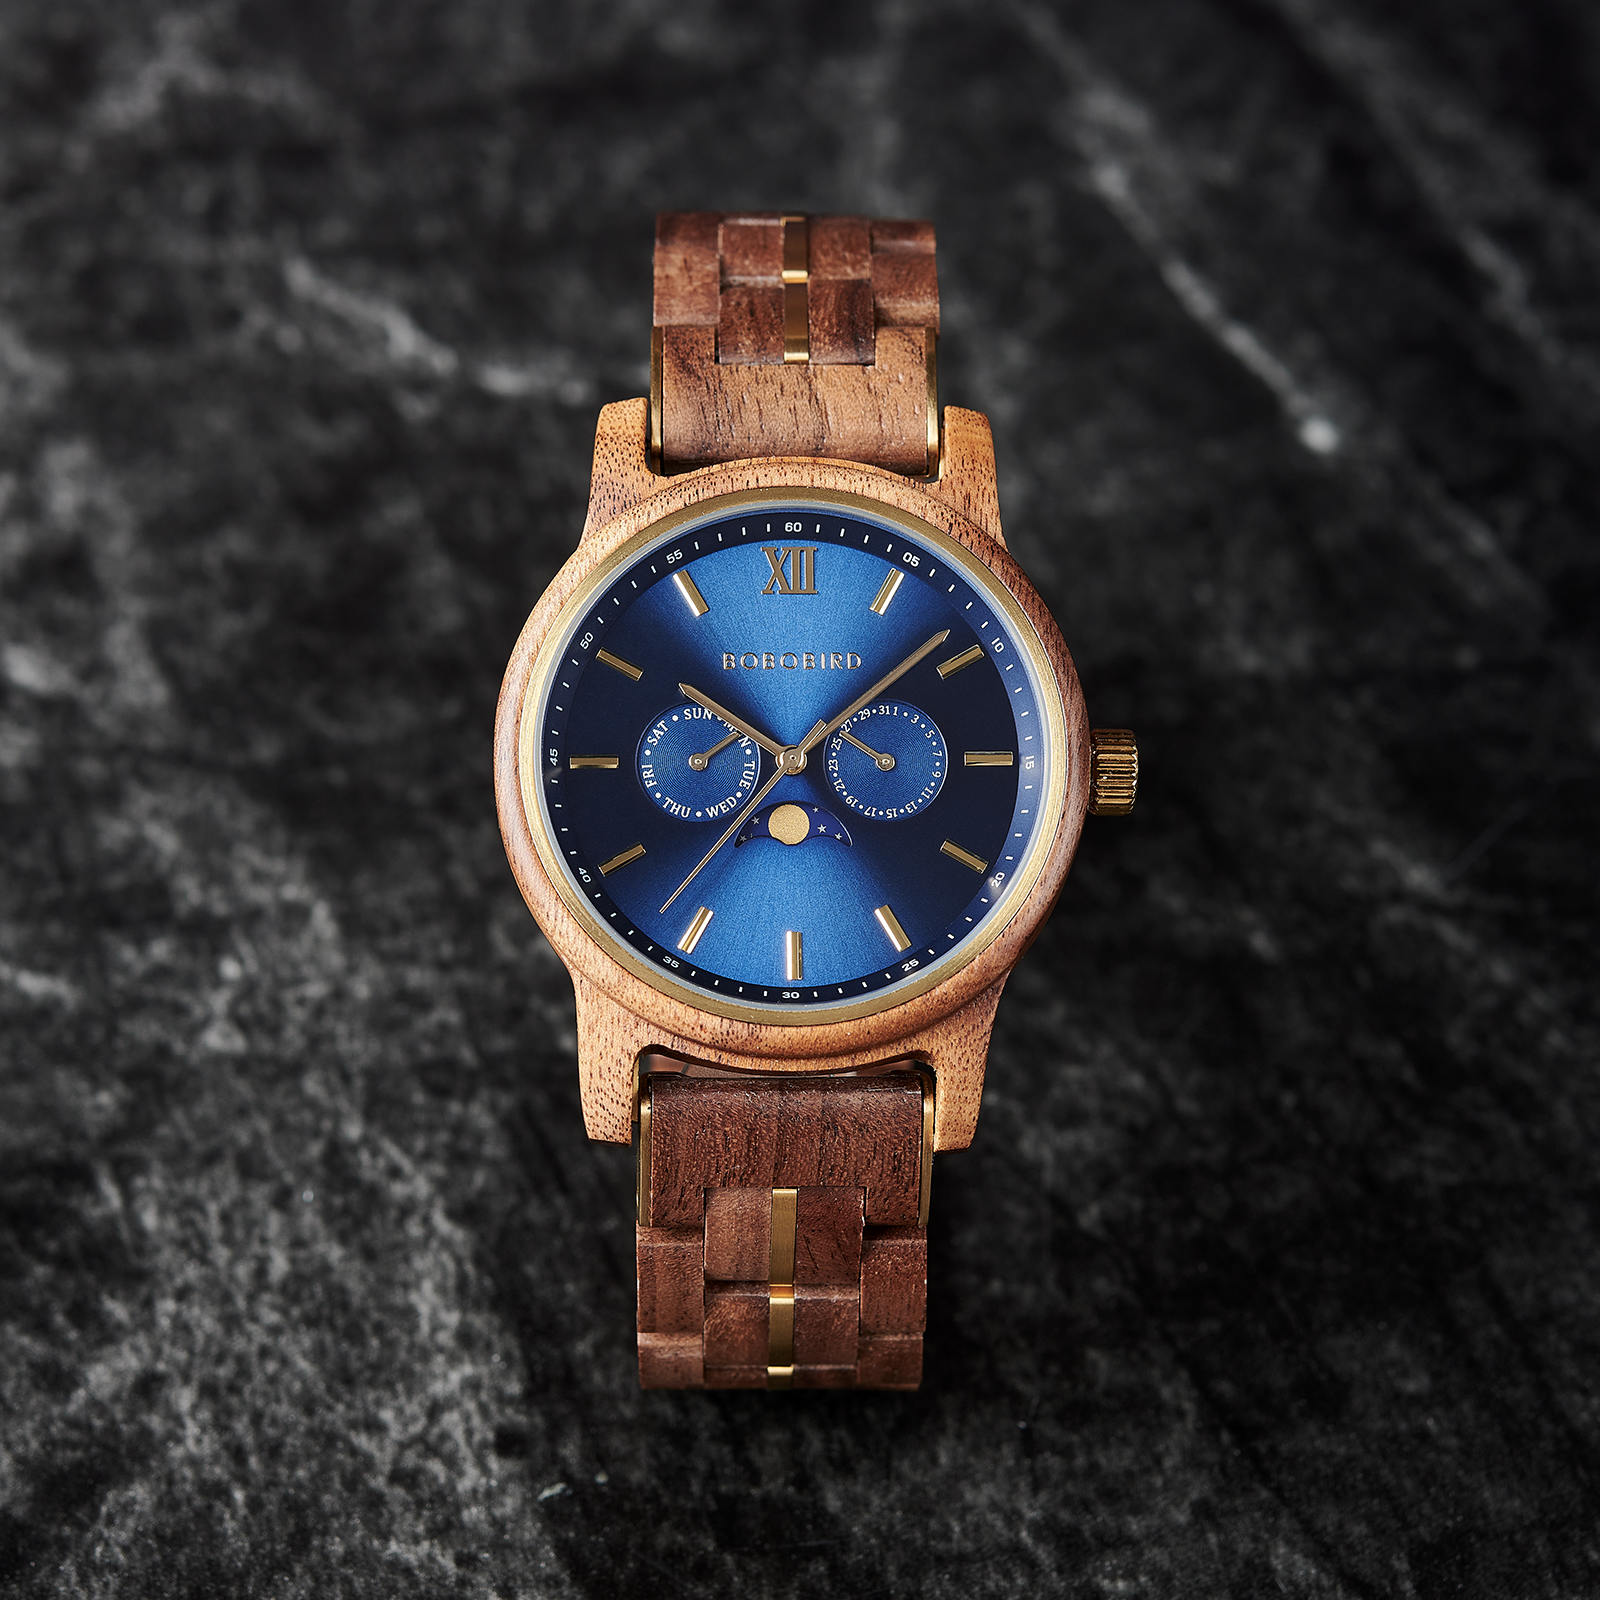 BOBO BIRD Men's Wooden Watches Classic Moonphase Movement Kosso Wood Blue Dial Sailor